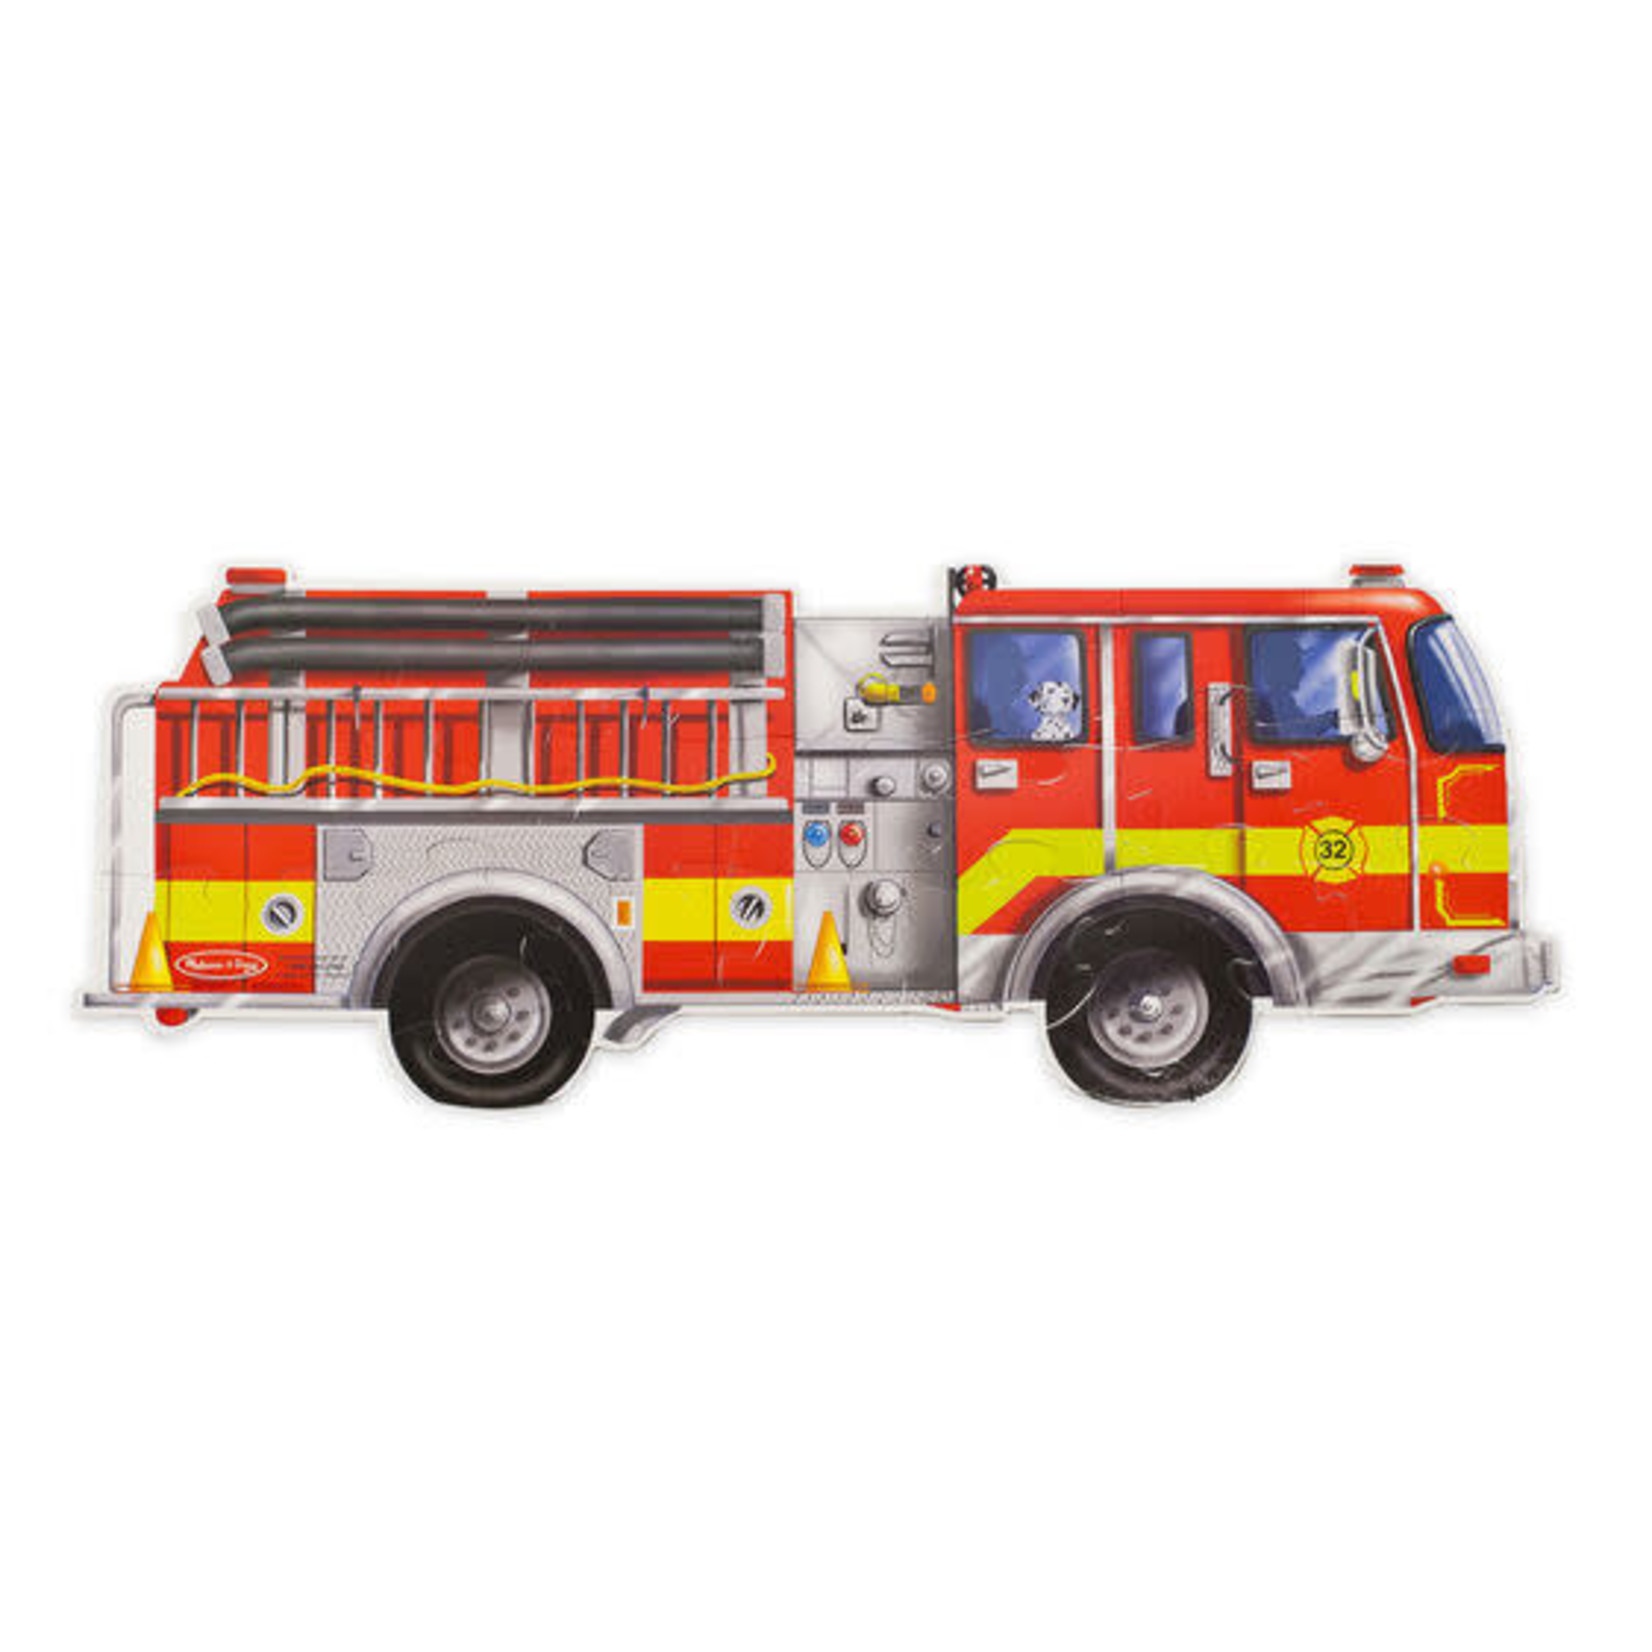 Melissa and Doug Giant Fire Truck Floor Puzzle (24 pieces)